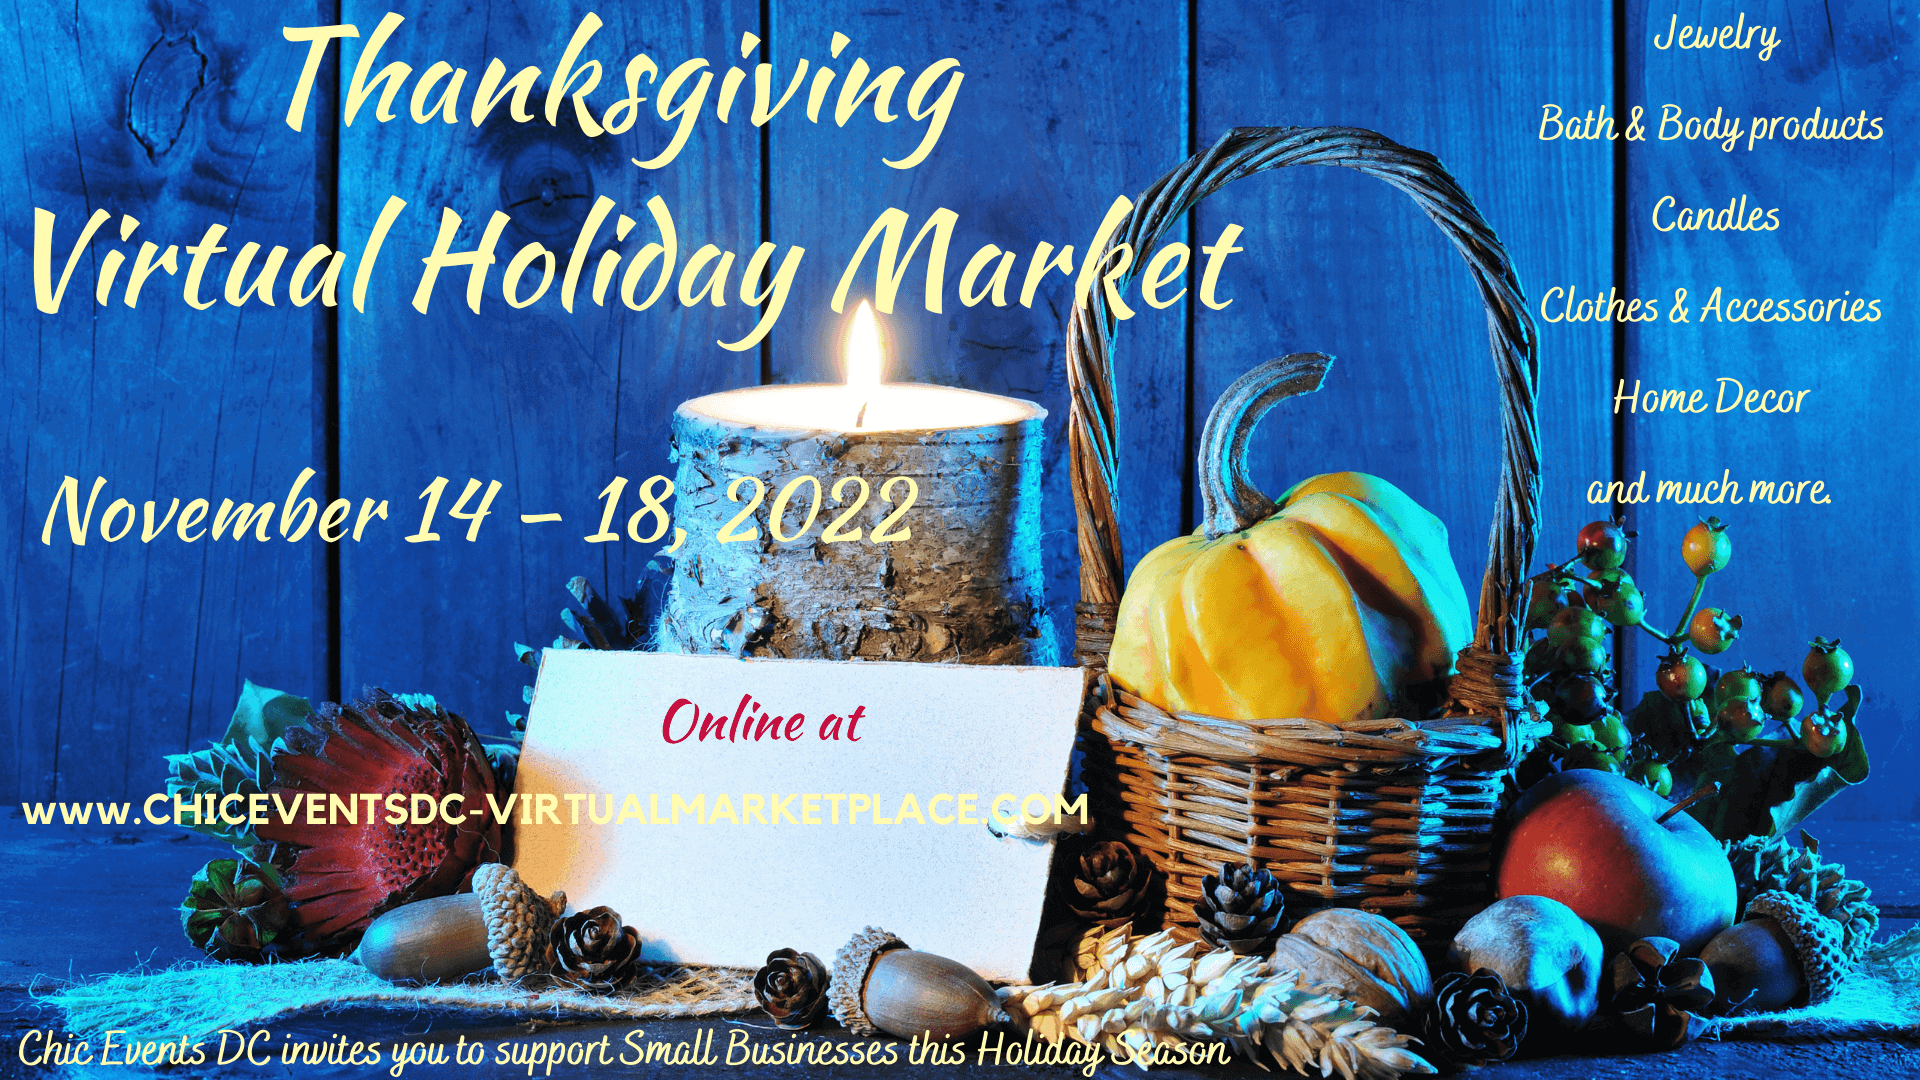 Thanksgiving Virtual HolidayMarket ~ Jewelry, Bath & Body and Home Decors